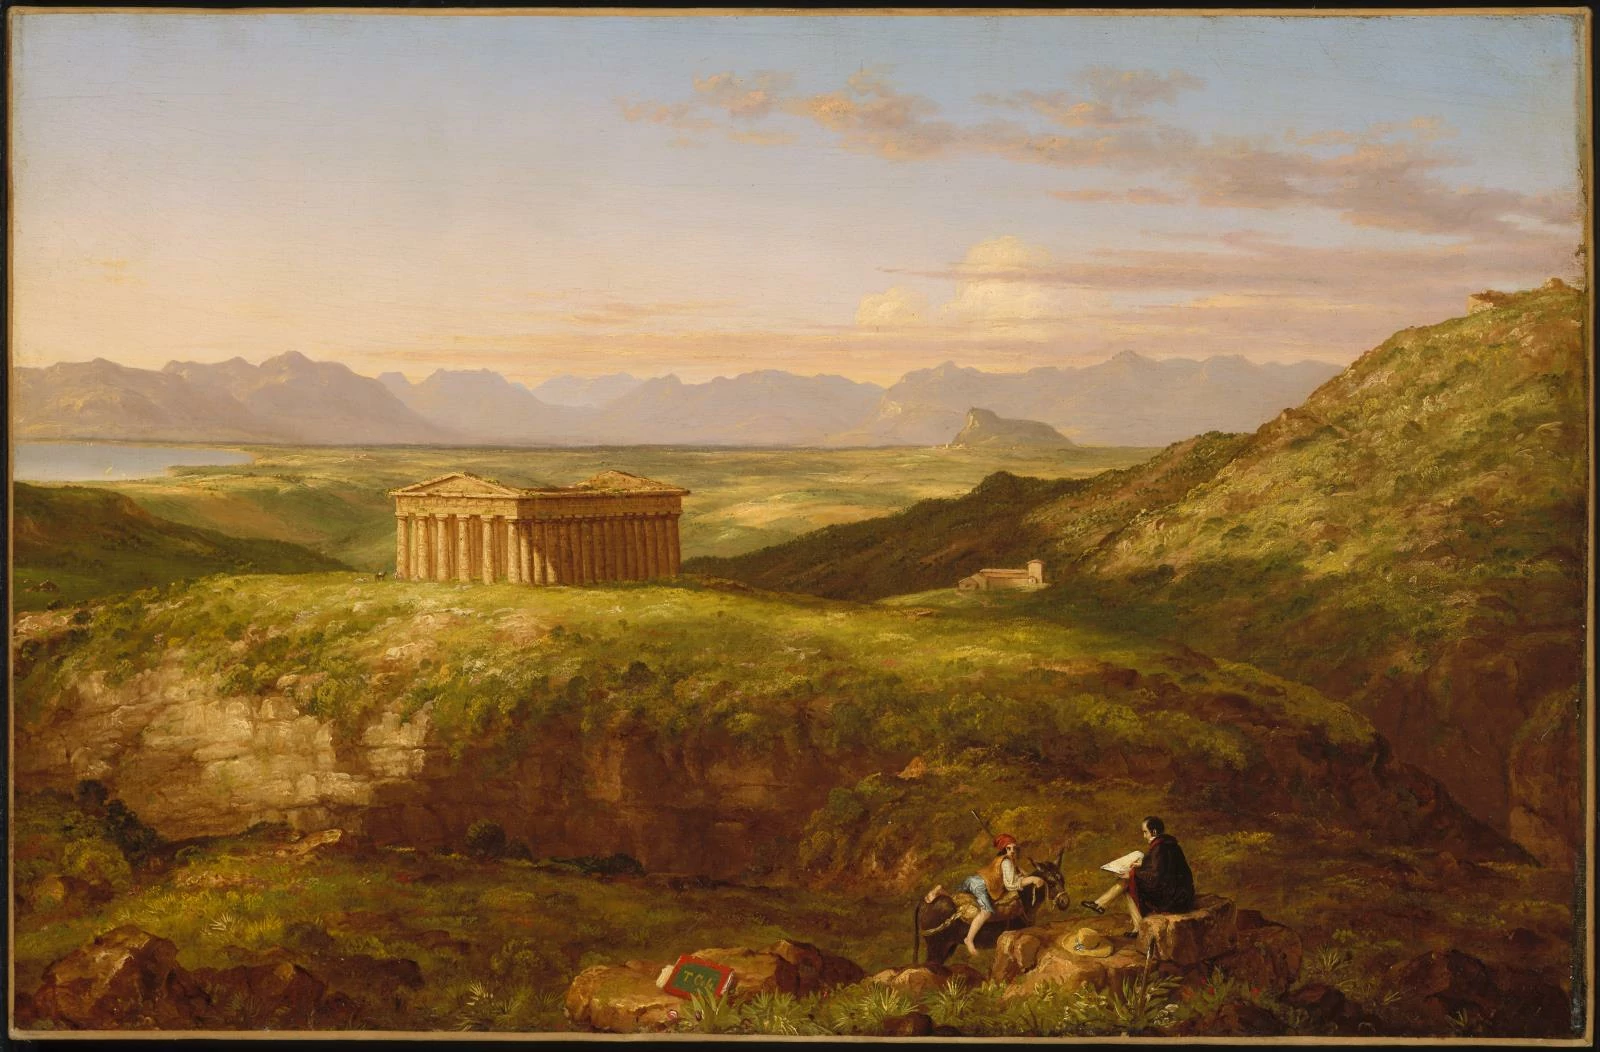 The Temple of Segesta with the Artist Sketching, Thomas Cole